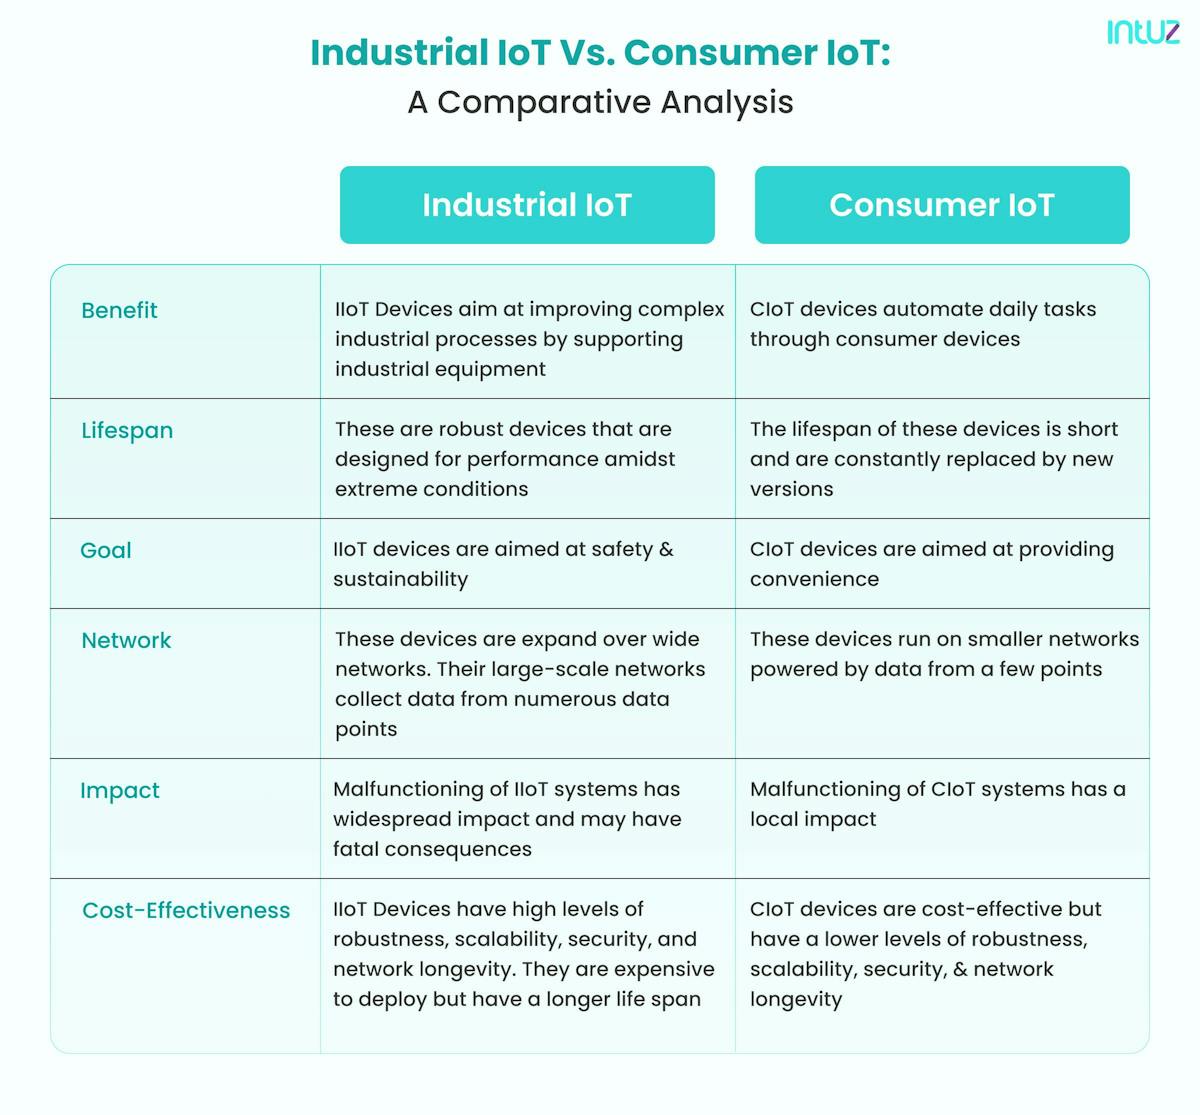 Industrial IoT vs. Consumer IoT: A comparative analysis